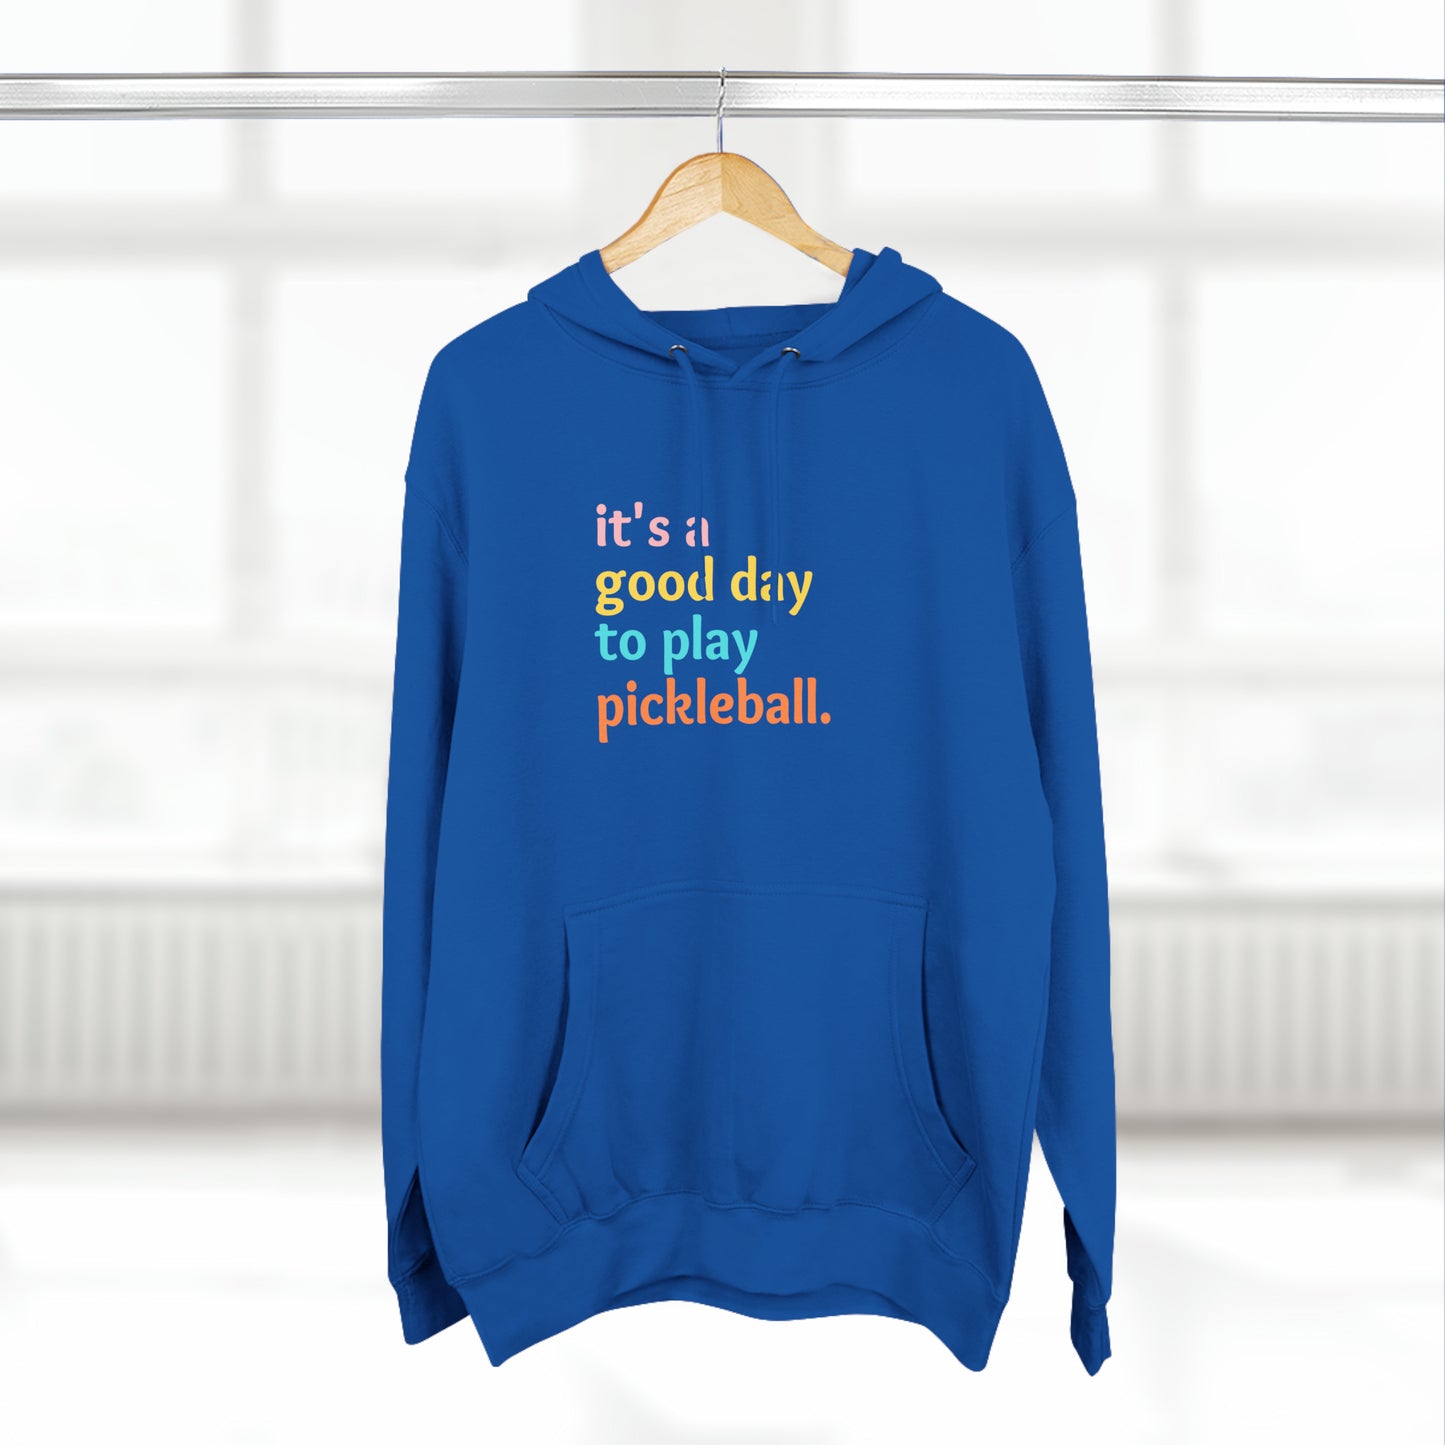 Unisex It's A Good Day To Play Pickleball. Premium Pullover Hoodie